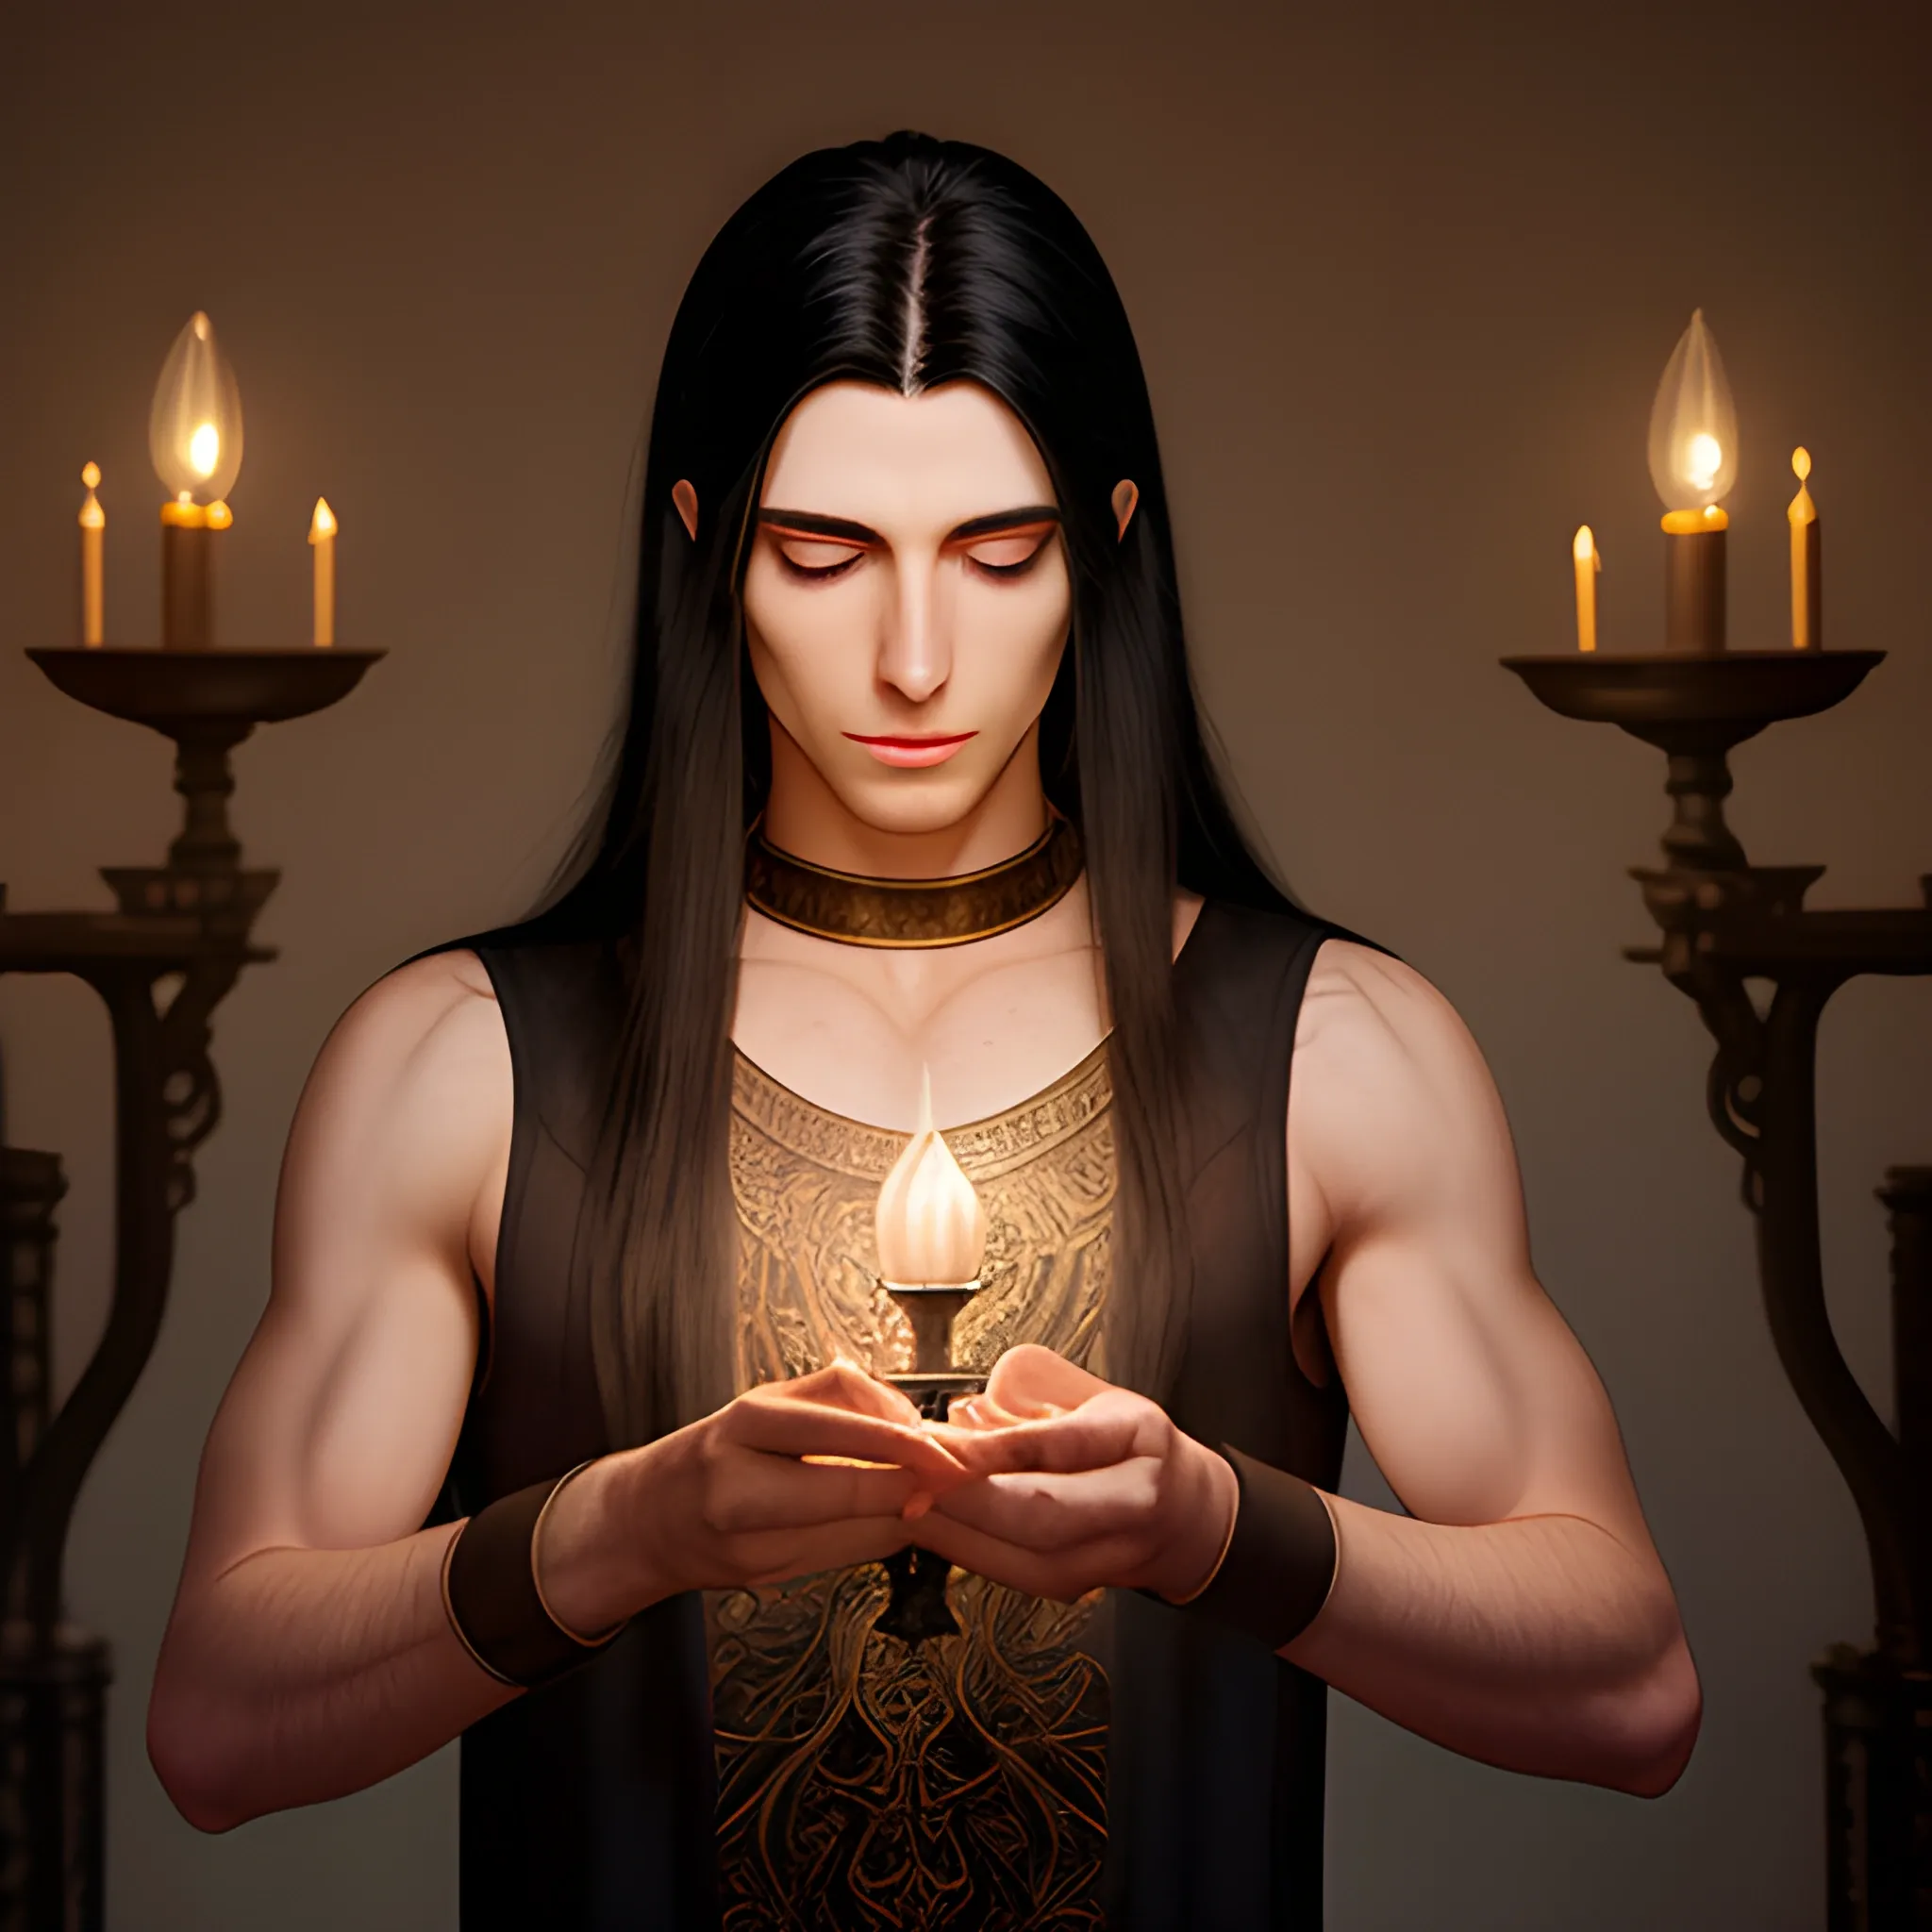 male, skinny, long black haired, aasimar,radiating light , front, rubbing oil lamp